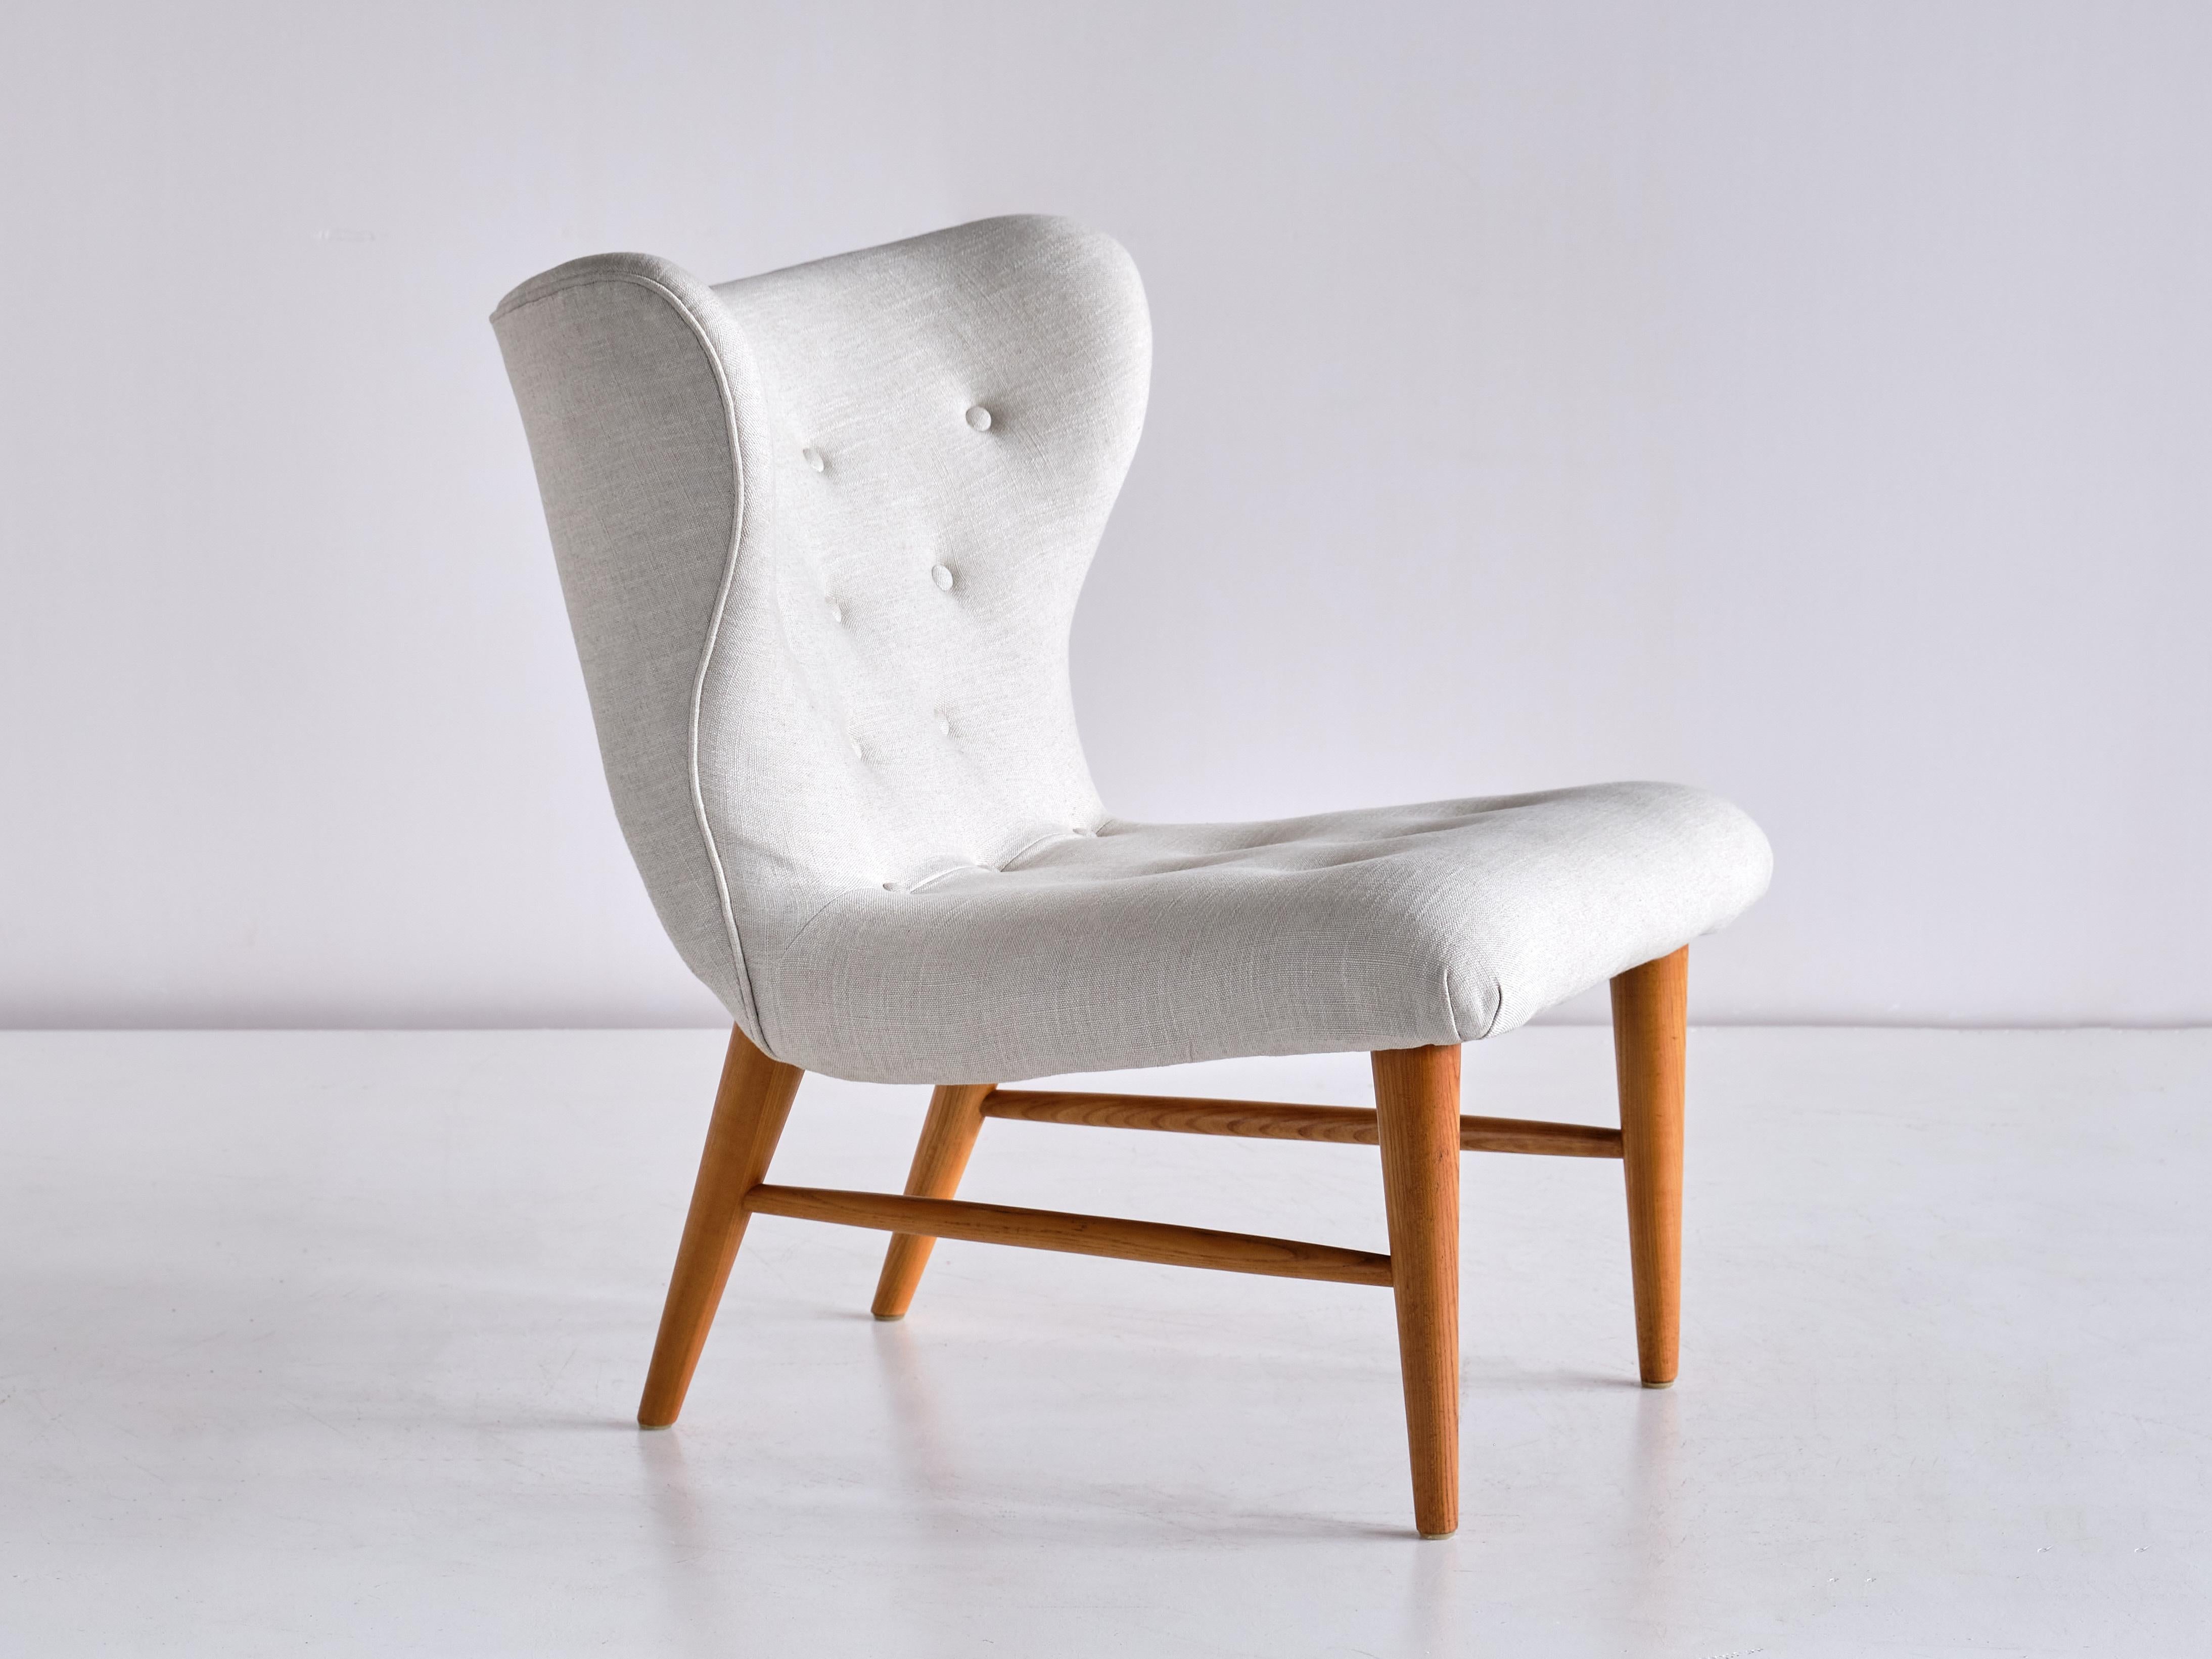 Cotton Eric Bertil Karlén Pair of Lounge Chairs in Ivory Linen and Elm, Sweden, 1940s For Sale